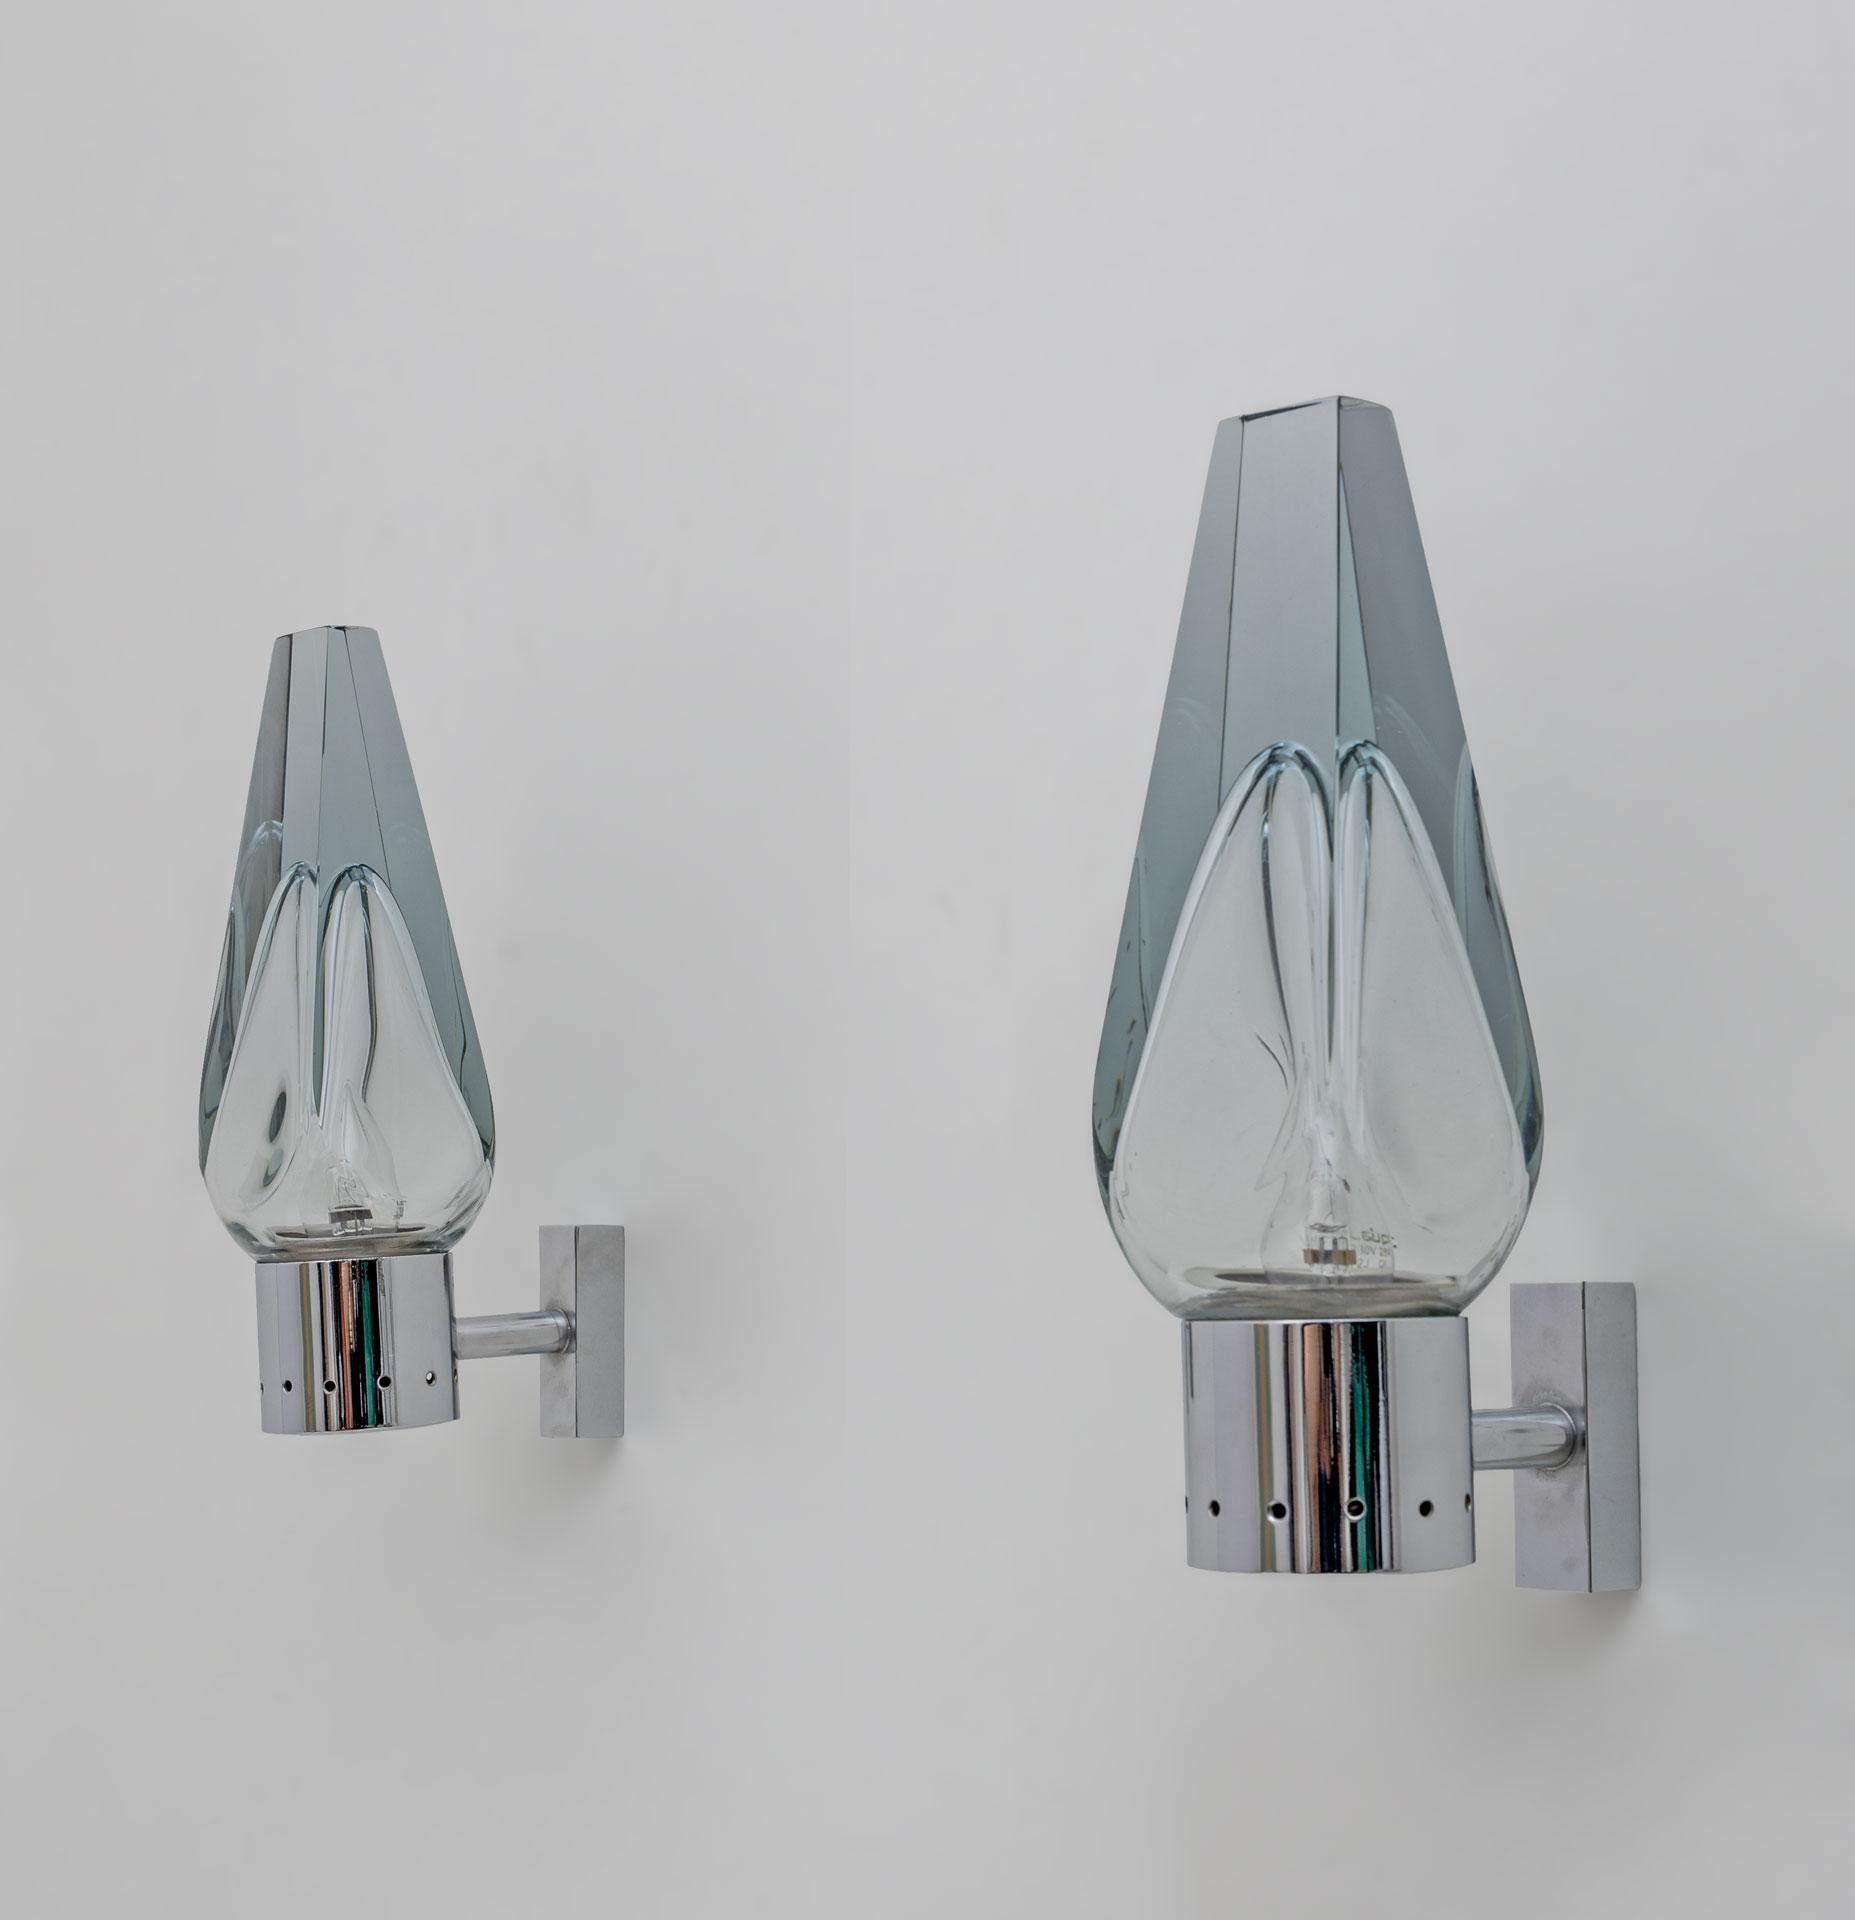 Pair of wall lights by Flavio Poli for Seguso, in chromed brass and Murano glass. Designed and produced in Italy, around the 1960s. Beautiful thick, tapered glass is the centerpiece of these sconces. The glass has a light blue hue and a central